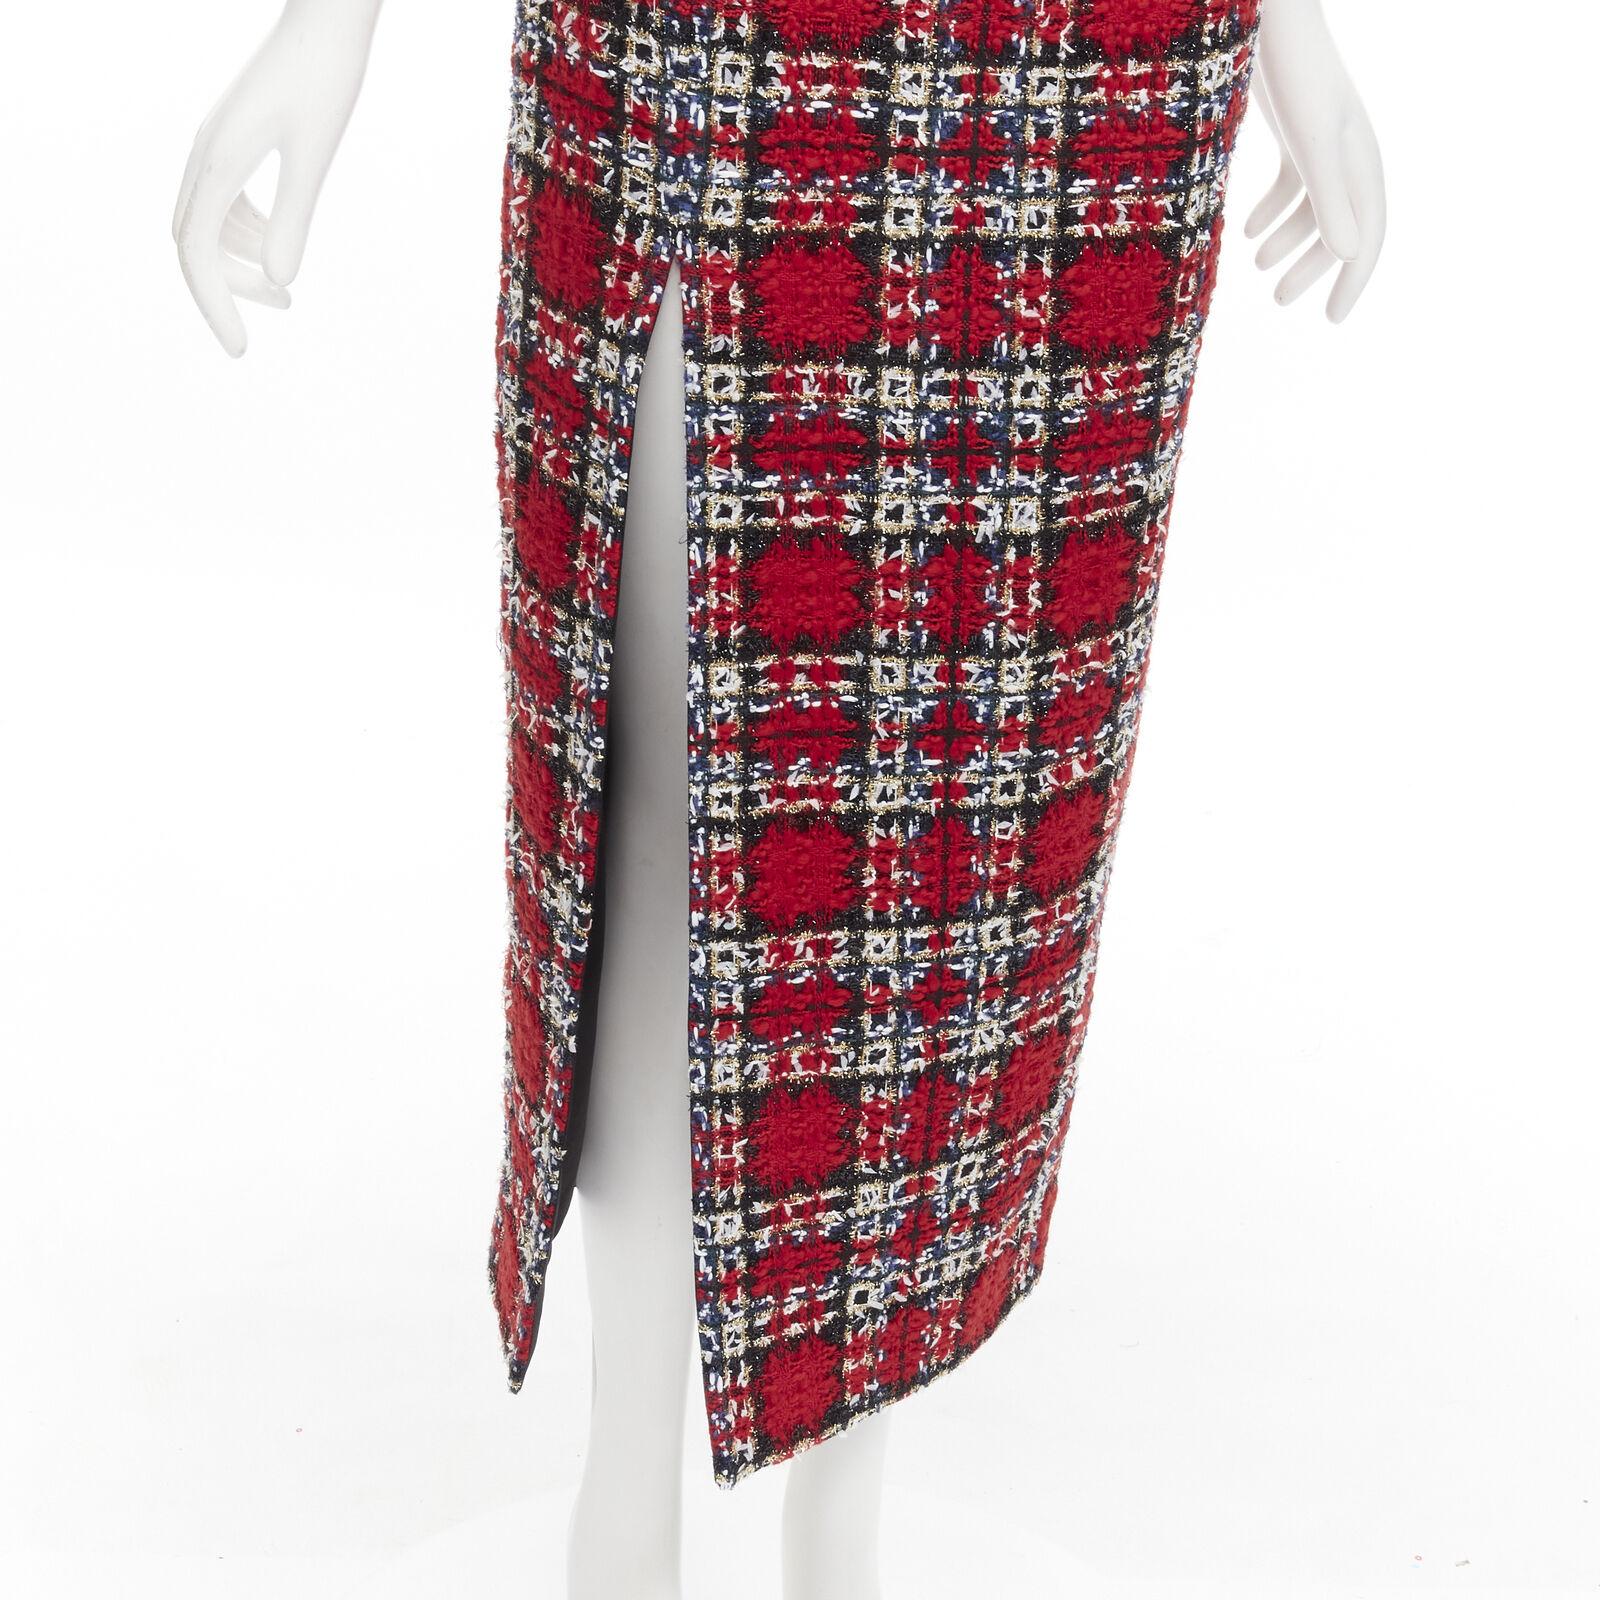 HALPERN red plaid check tweed high slit pencil midi skirt FR34 XS
Reference: AAWC/A00350
Brand: Halpern
Material: Wool, Blend
Color: Red
Pattern: Plaid
Closure: Zip
Lining: Fabric
Made in: United Kingdom

CONDITION:
Condition: Excellent, this item